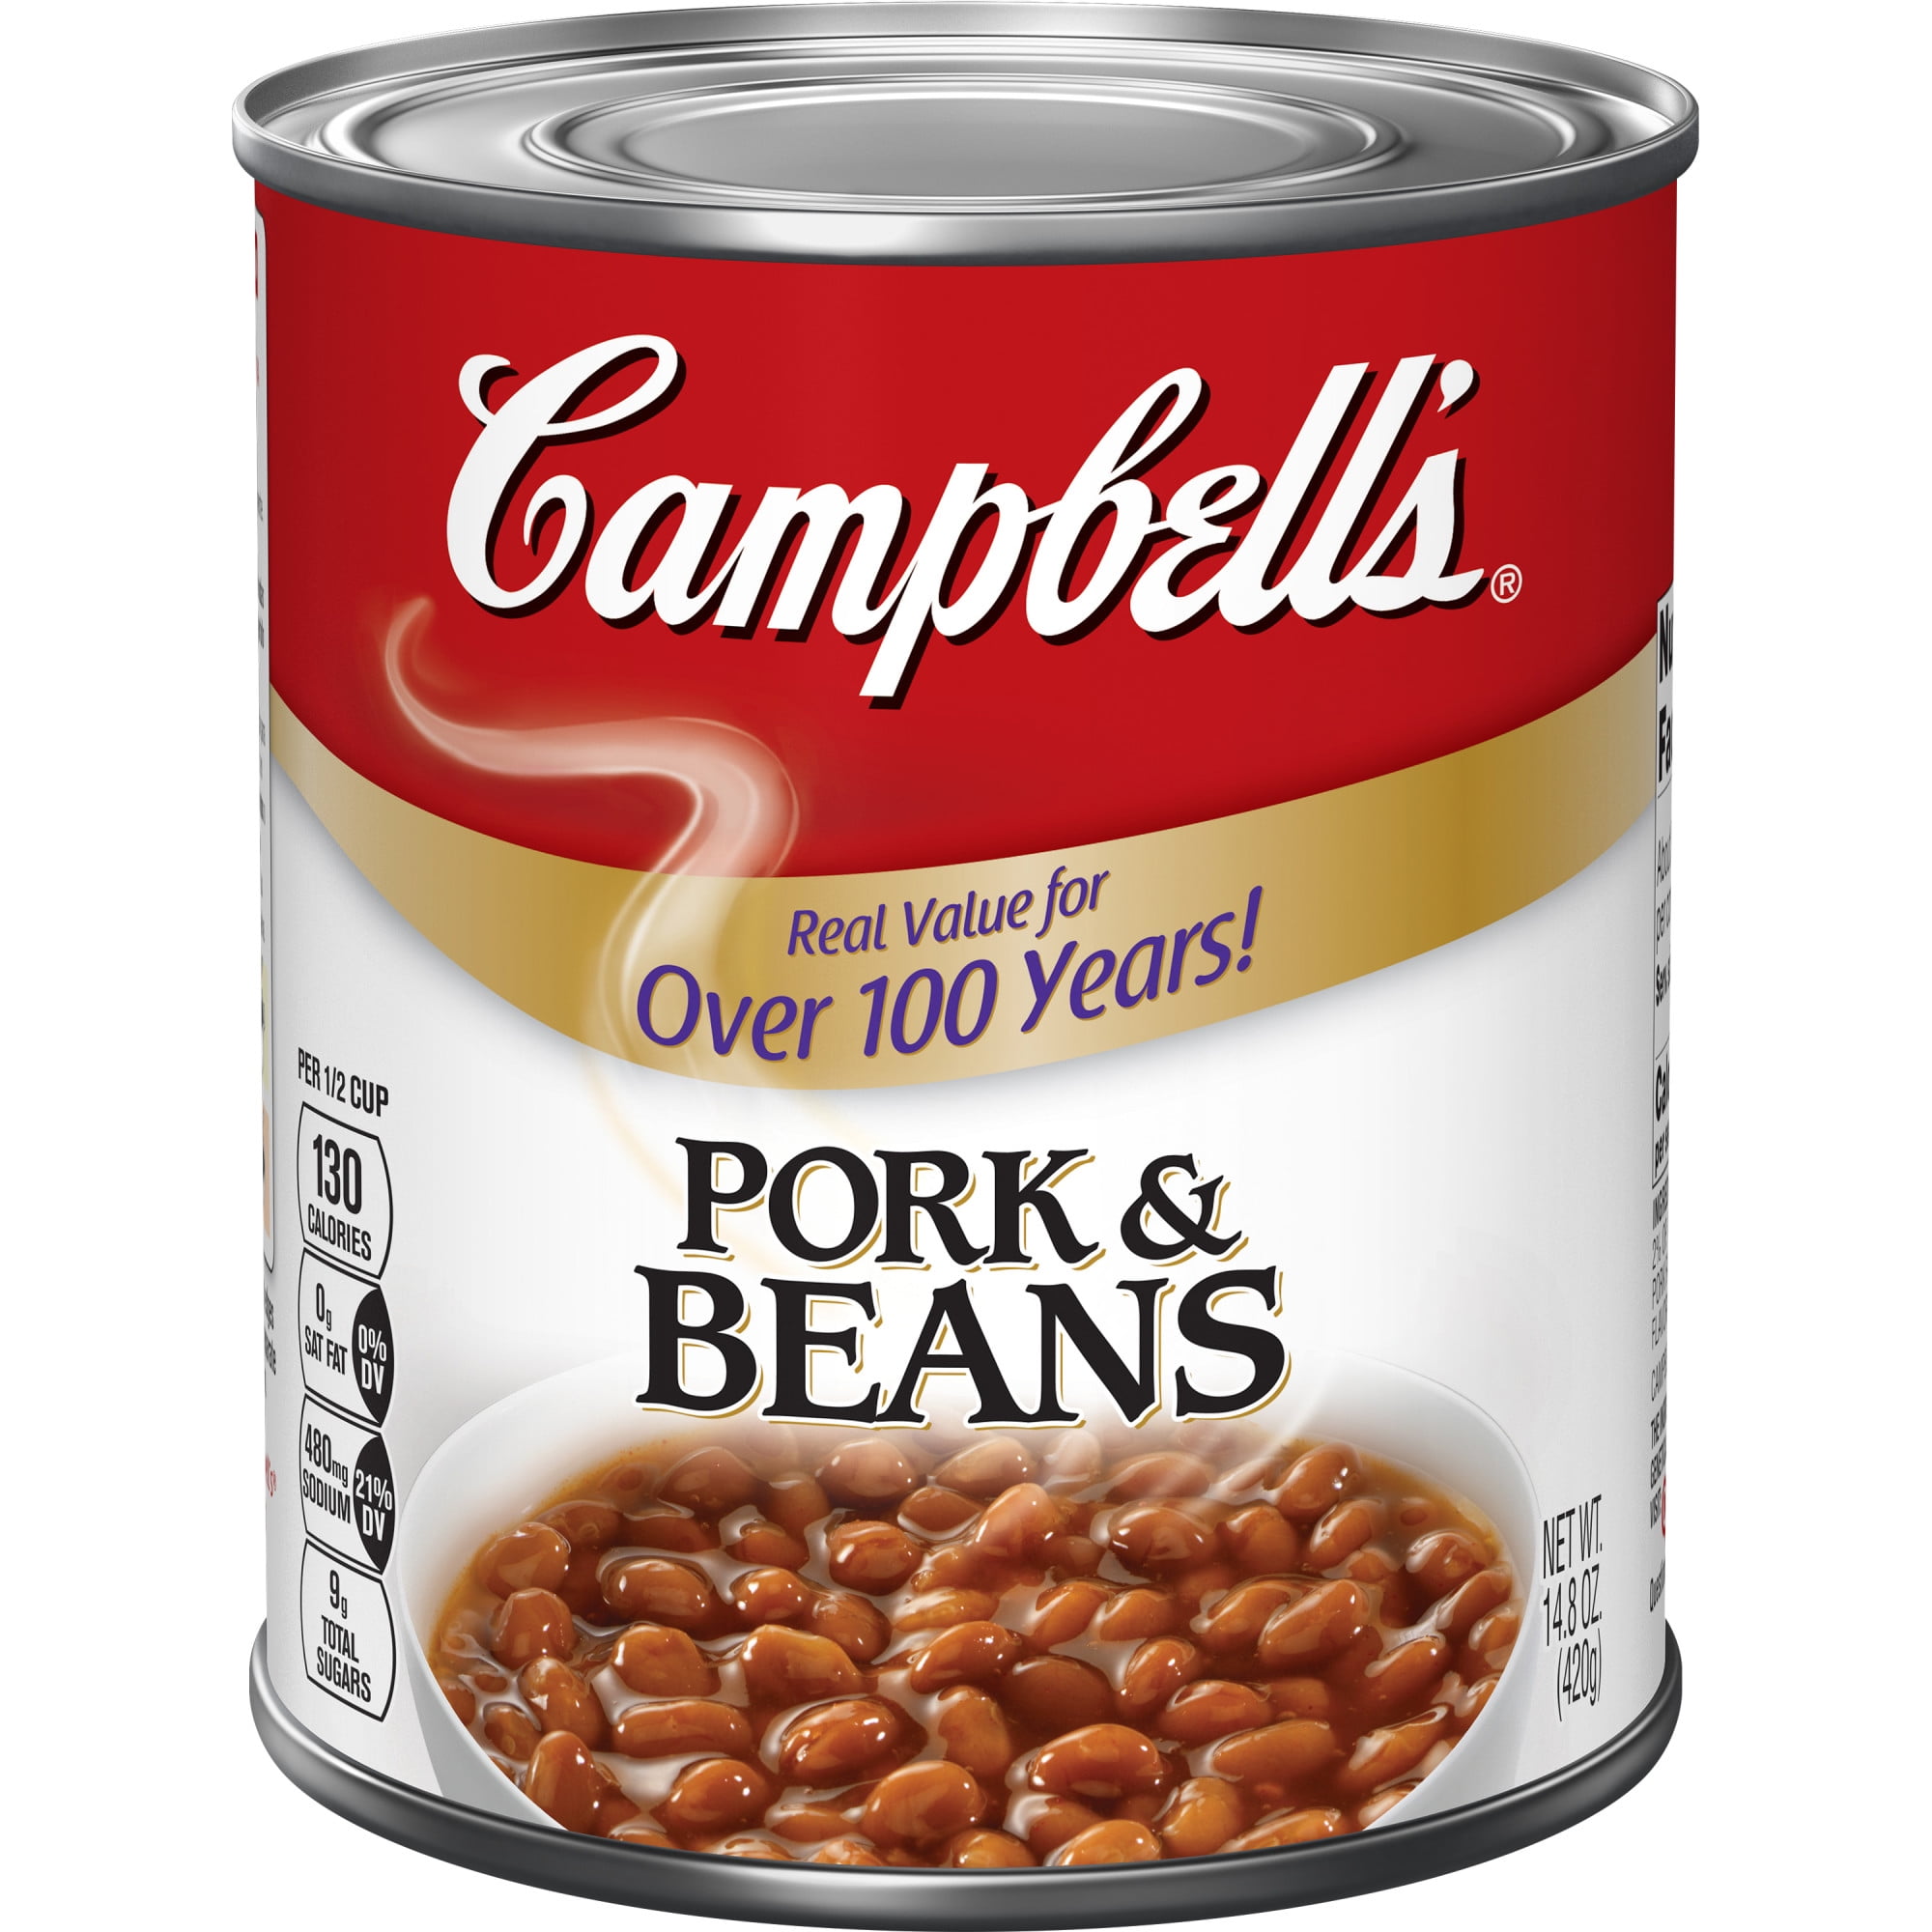 Large Cans Of Pork And Beans